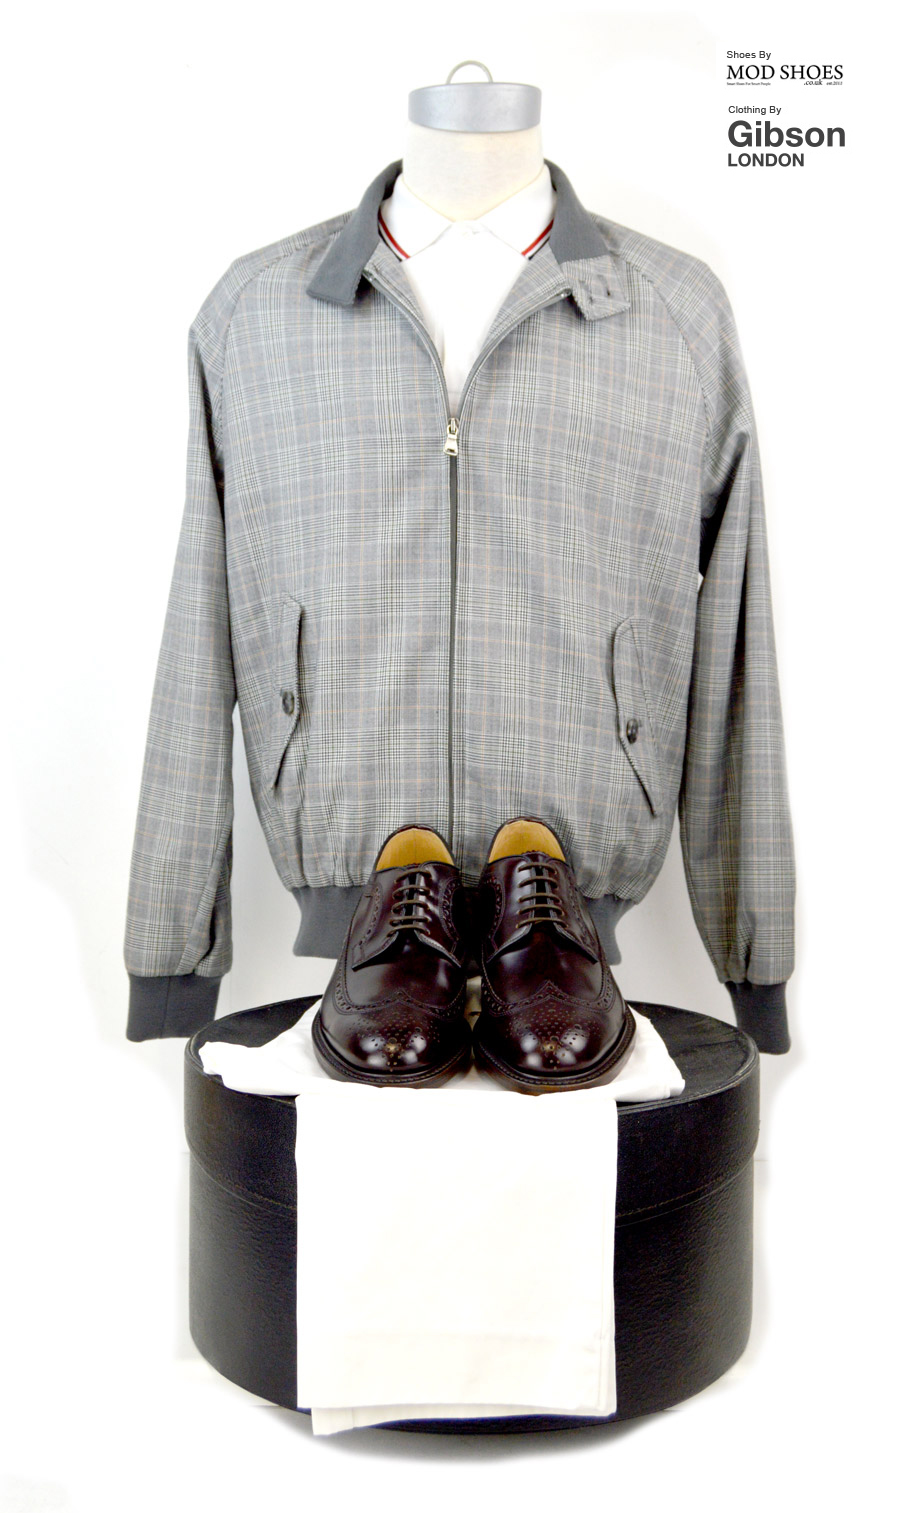 modshoes-oxblood-royals-with-prince-of-wales-harrington-jacket-from-Gibson-clothing